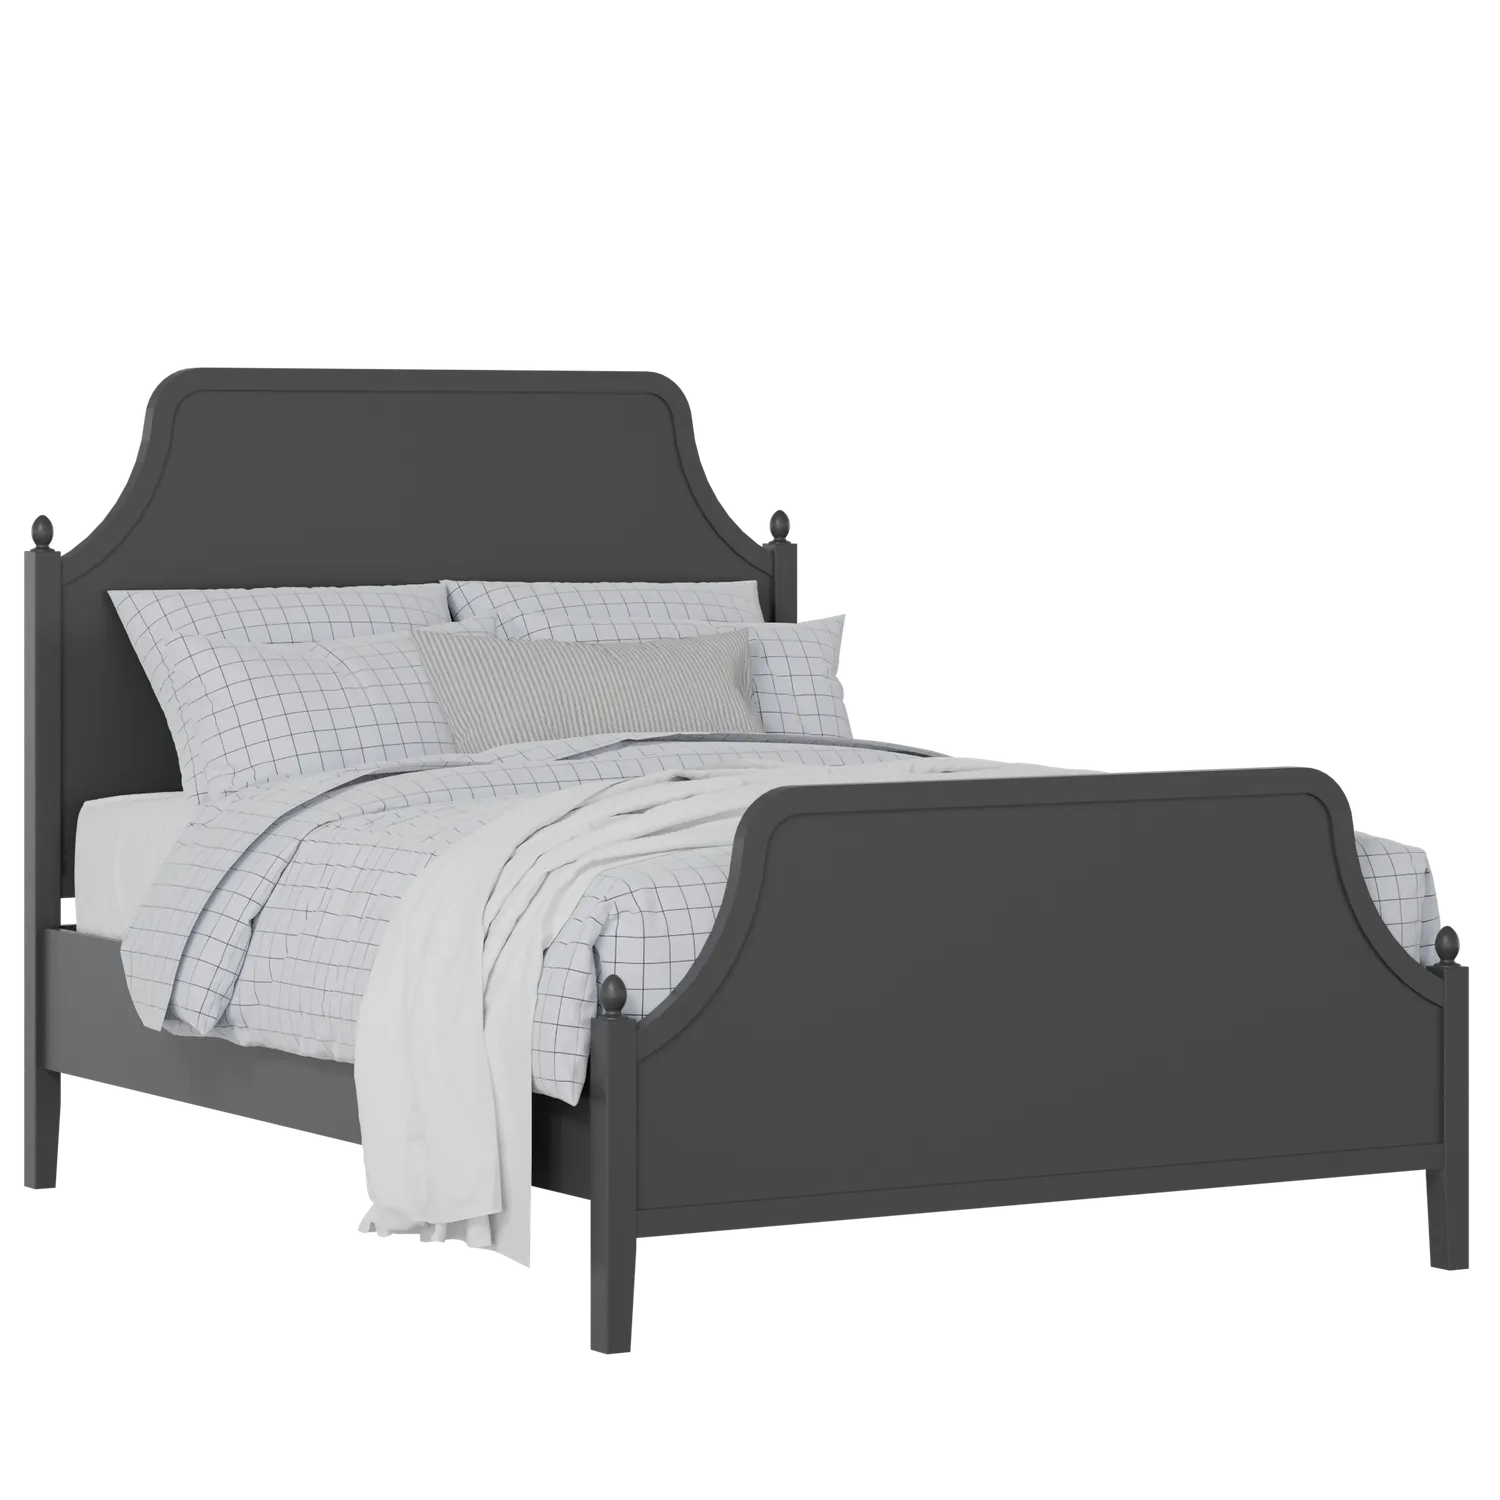 Ruskin painted wood bed in black with Juno mattress